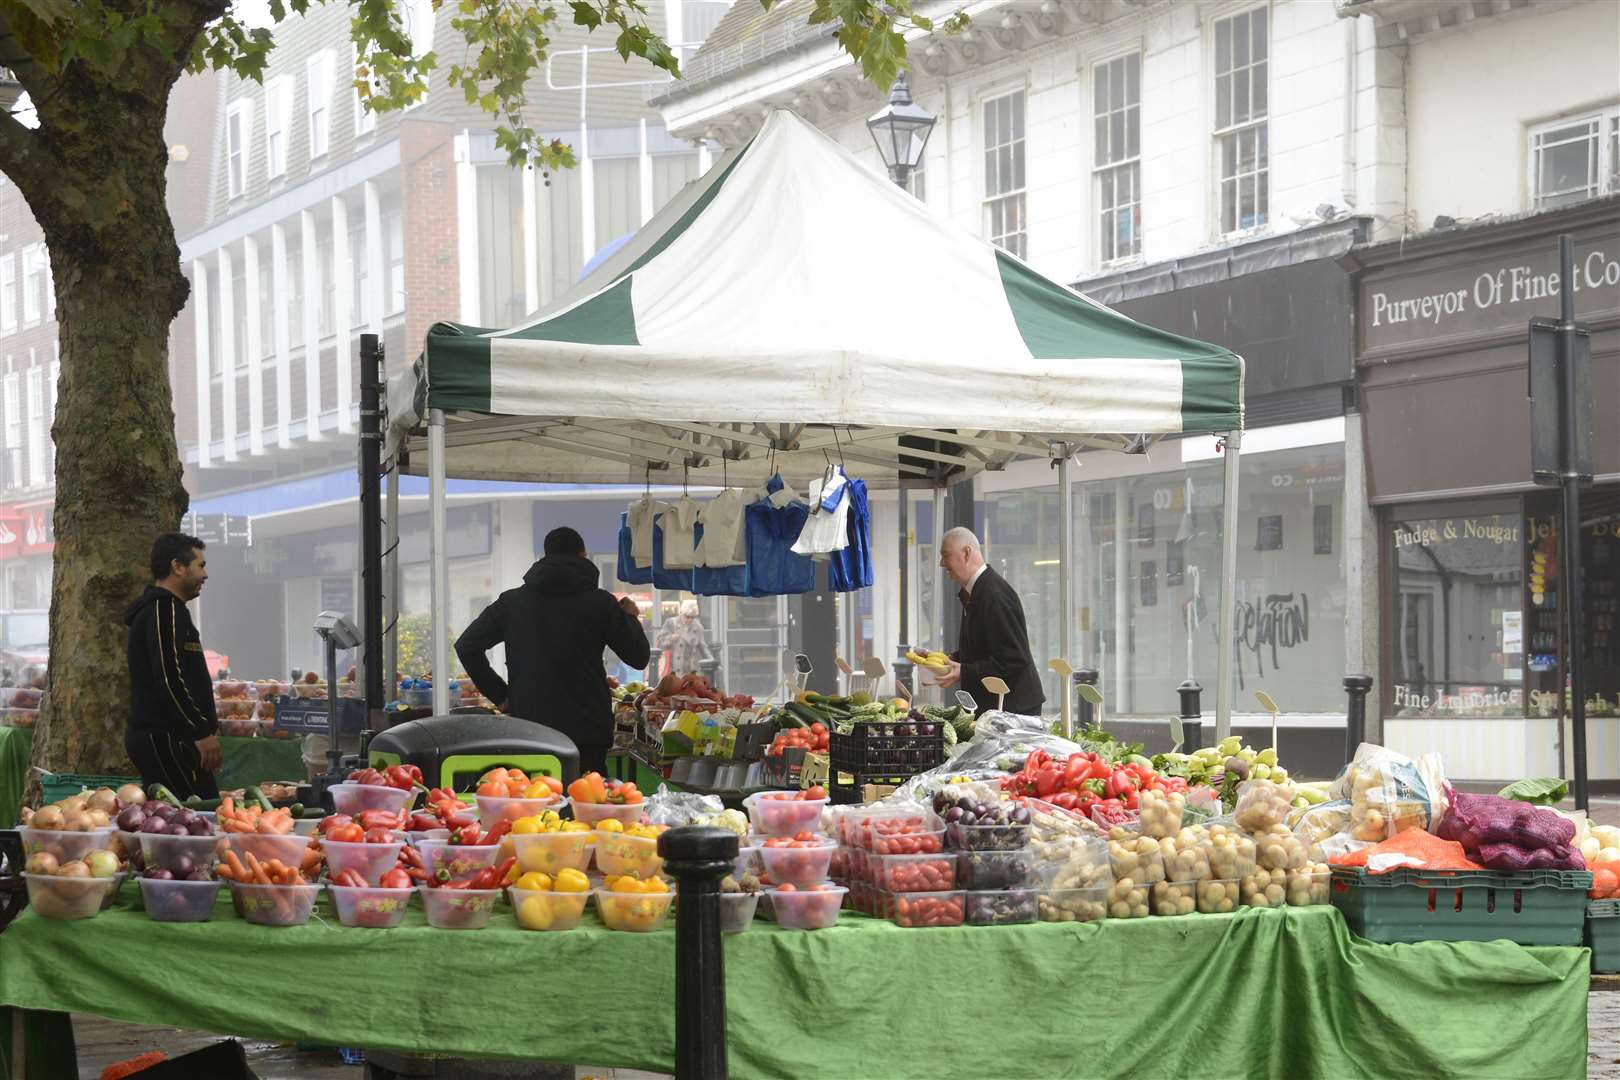 The market moved to Ashford's Lower High Street in 2008